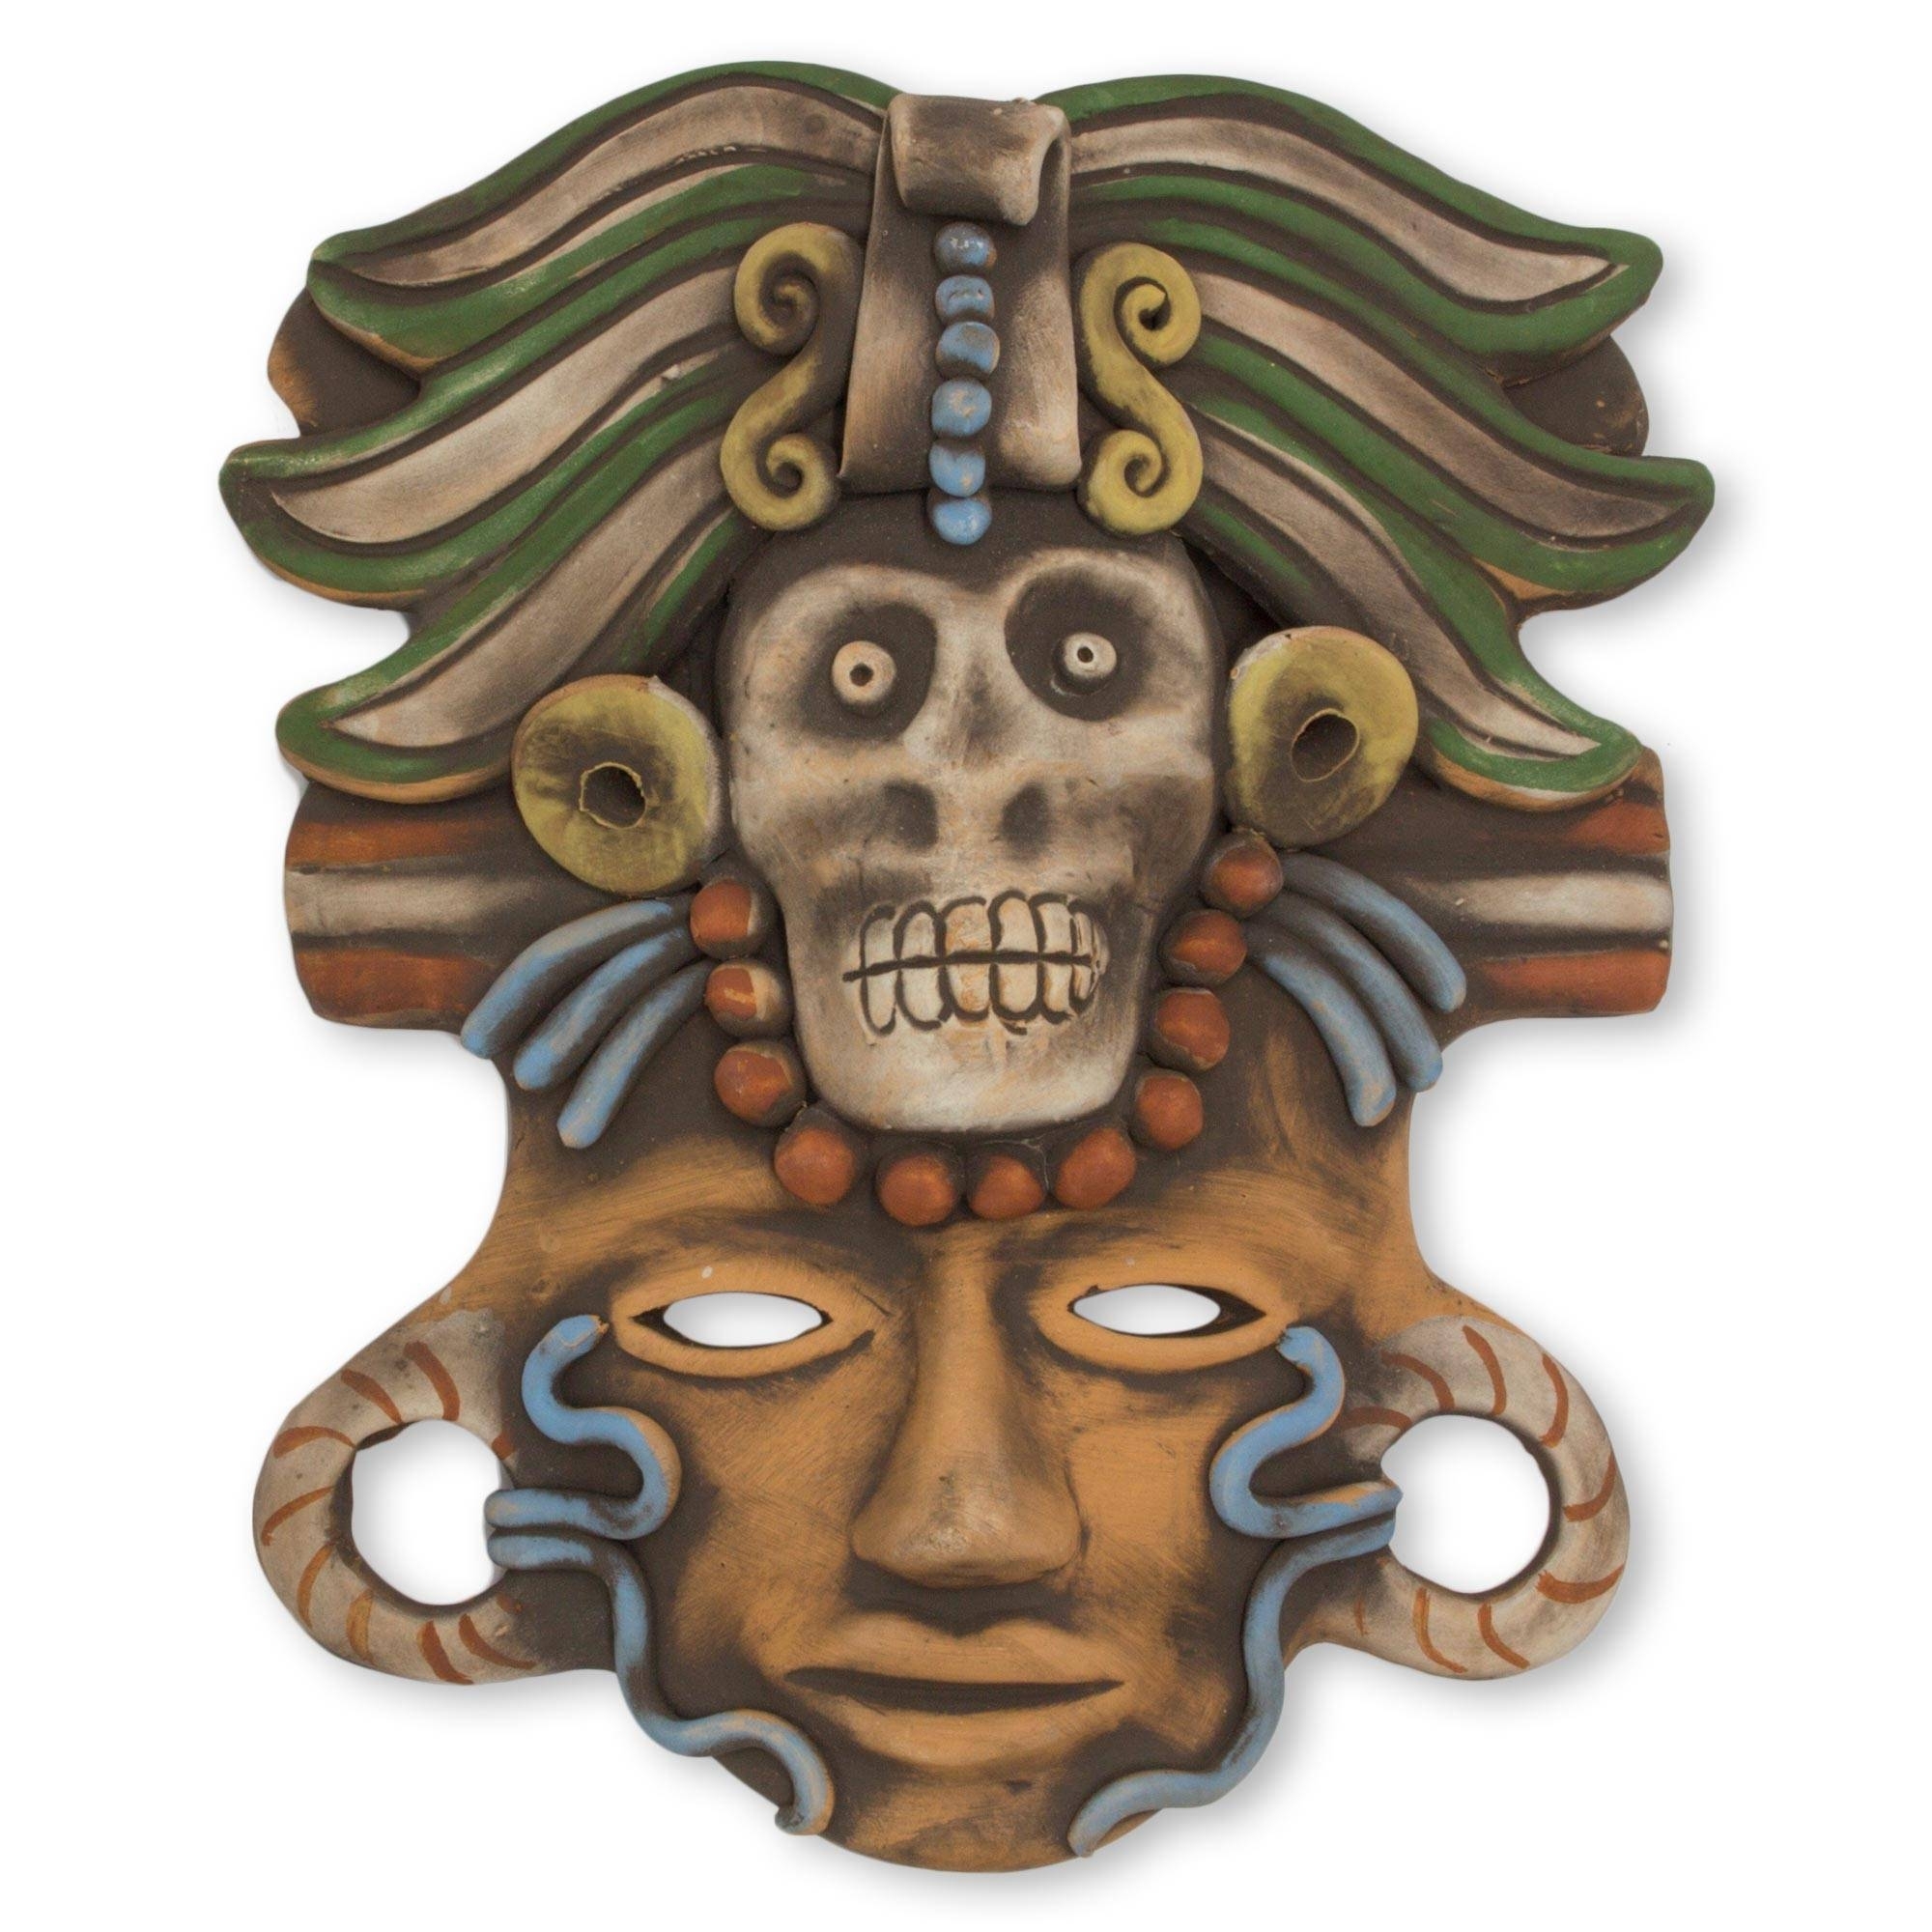 Aztec Masks At Novica throughout Aztec Masks And Ther Meanings